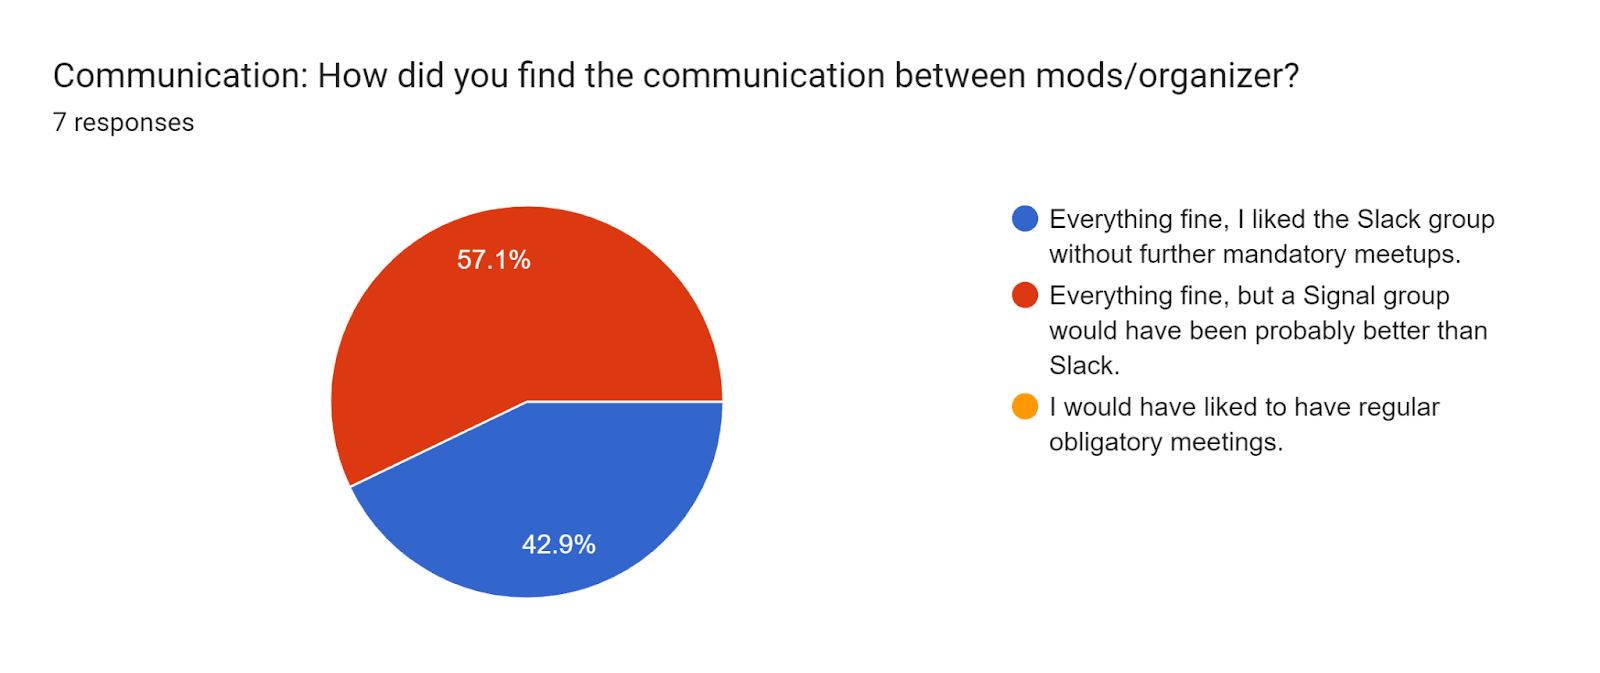 Forms response chart. Question title: Communication: How did you find the communication between mods/organizer?. Number of responses: 7 responses.